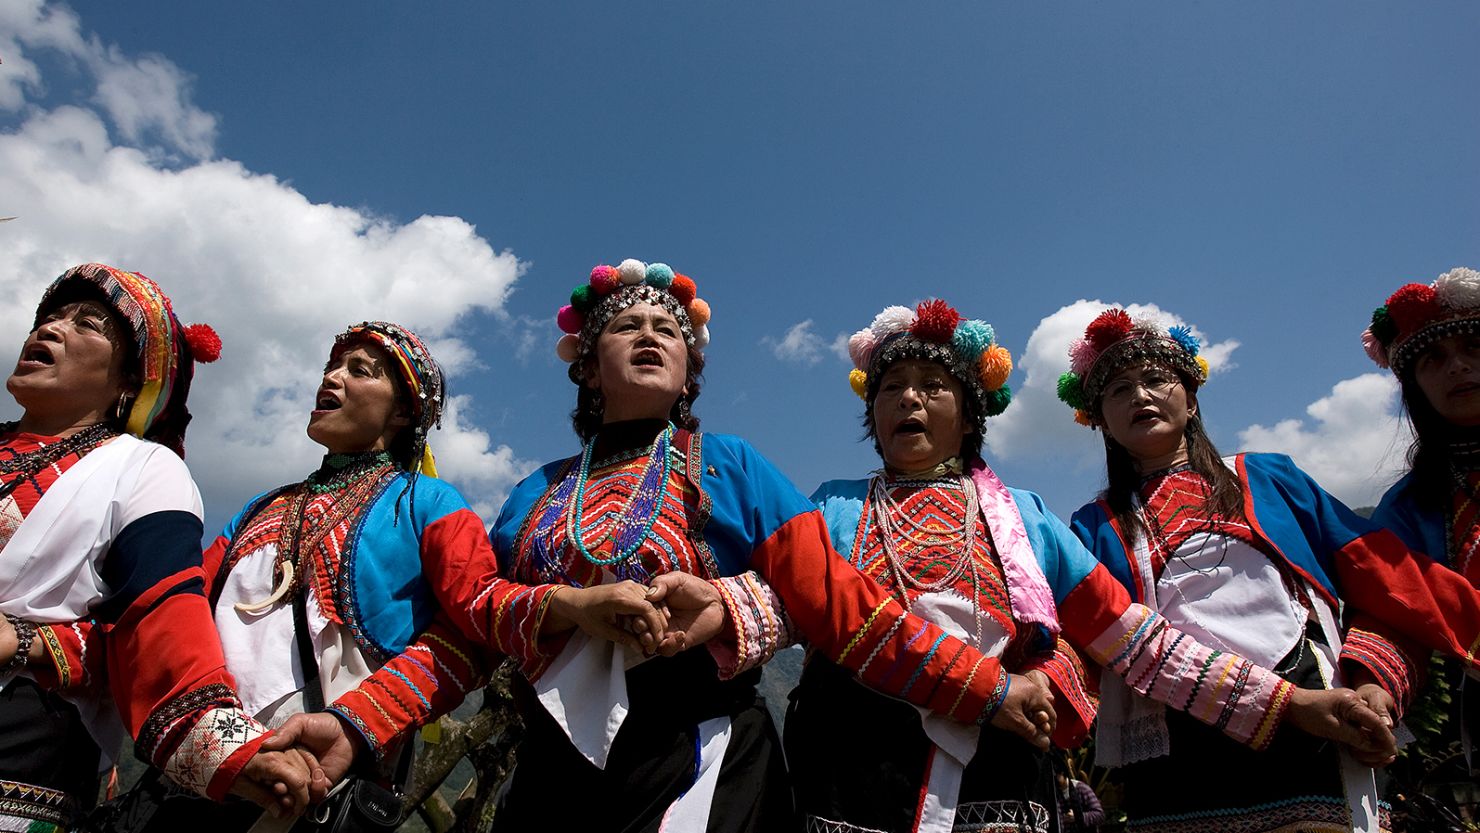 Women from the Tsou tribe in the village of Tefuye in Alishan on March 1, 2008.